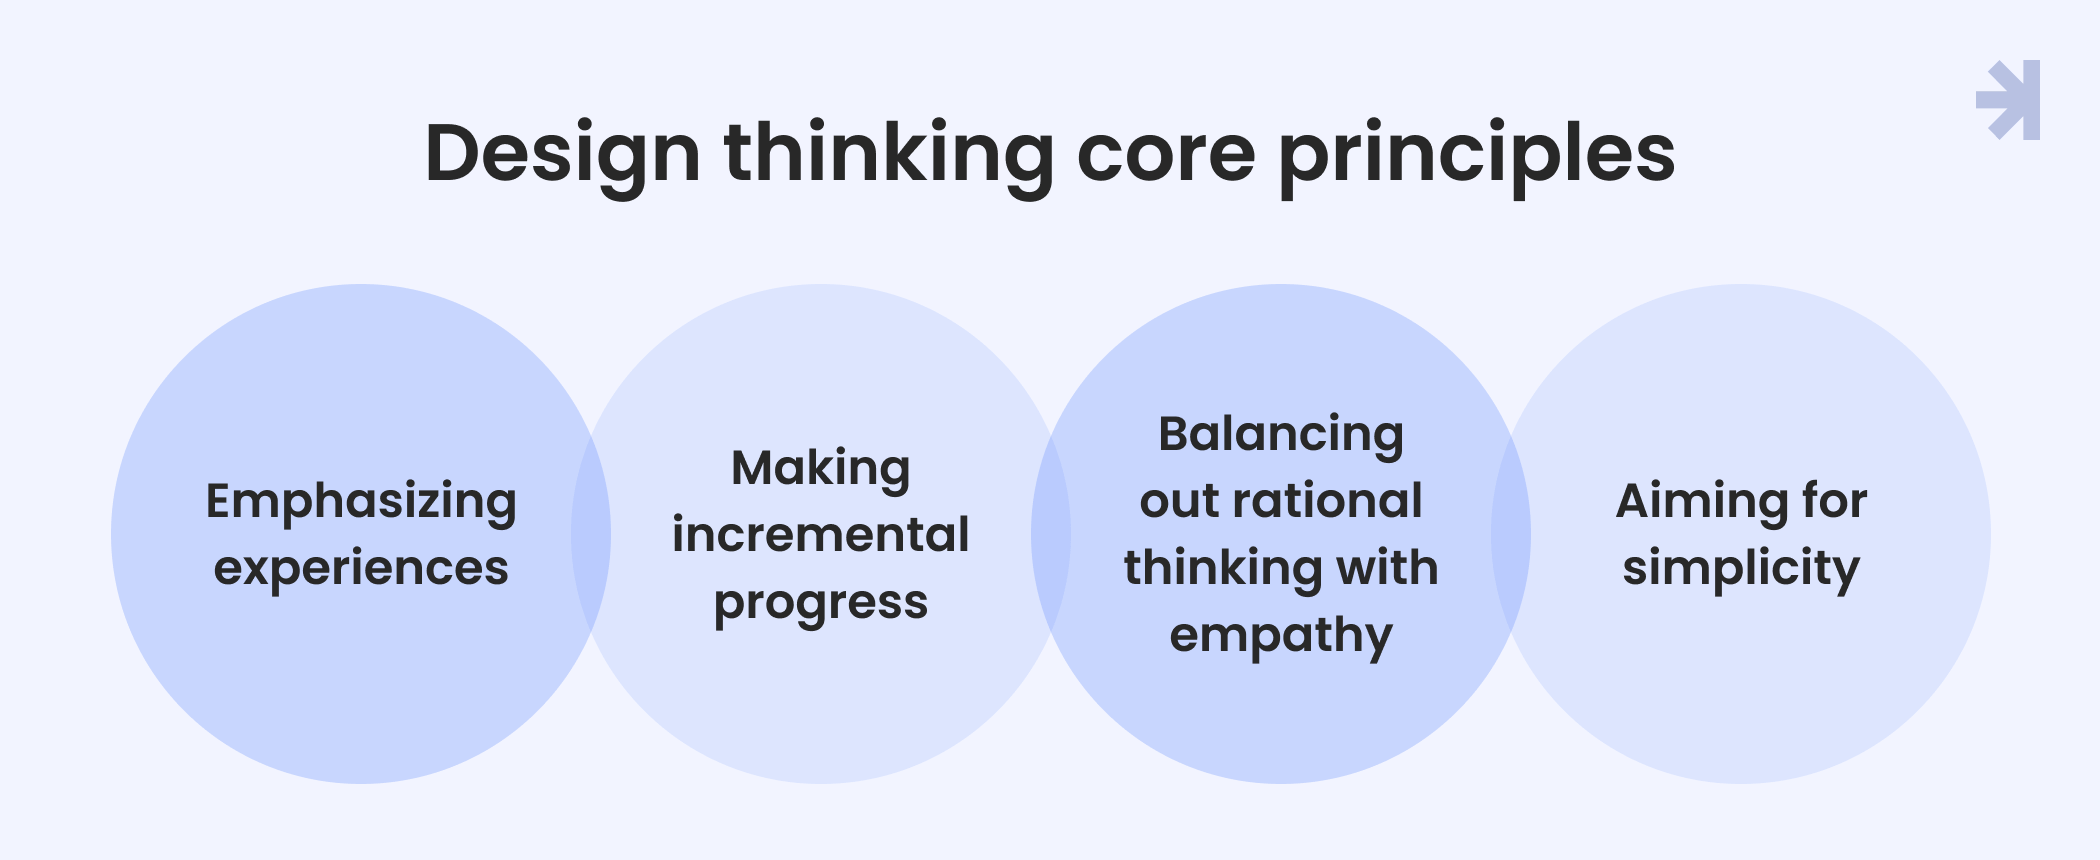 Human-Centered Design vs. Design Thinking: An Insightful Overview